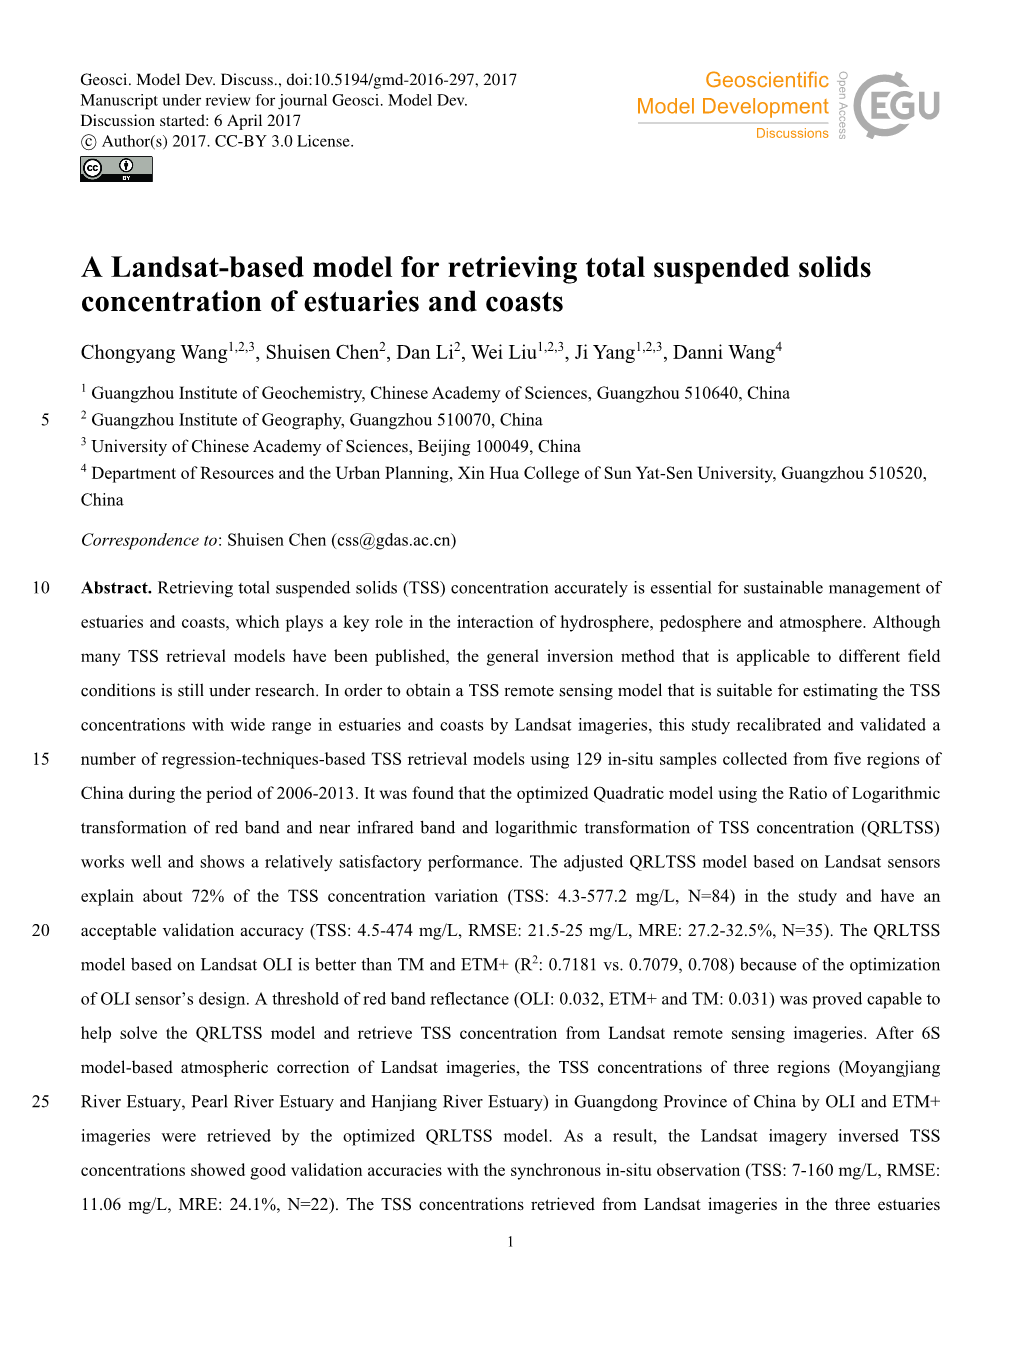 A Landsat-Based Model for Retrieving Total Suspended Solids Concentration of Estuaries and Coasts